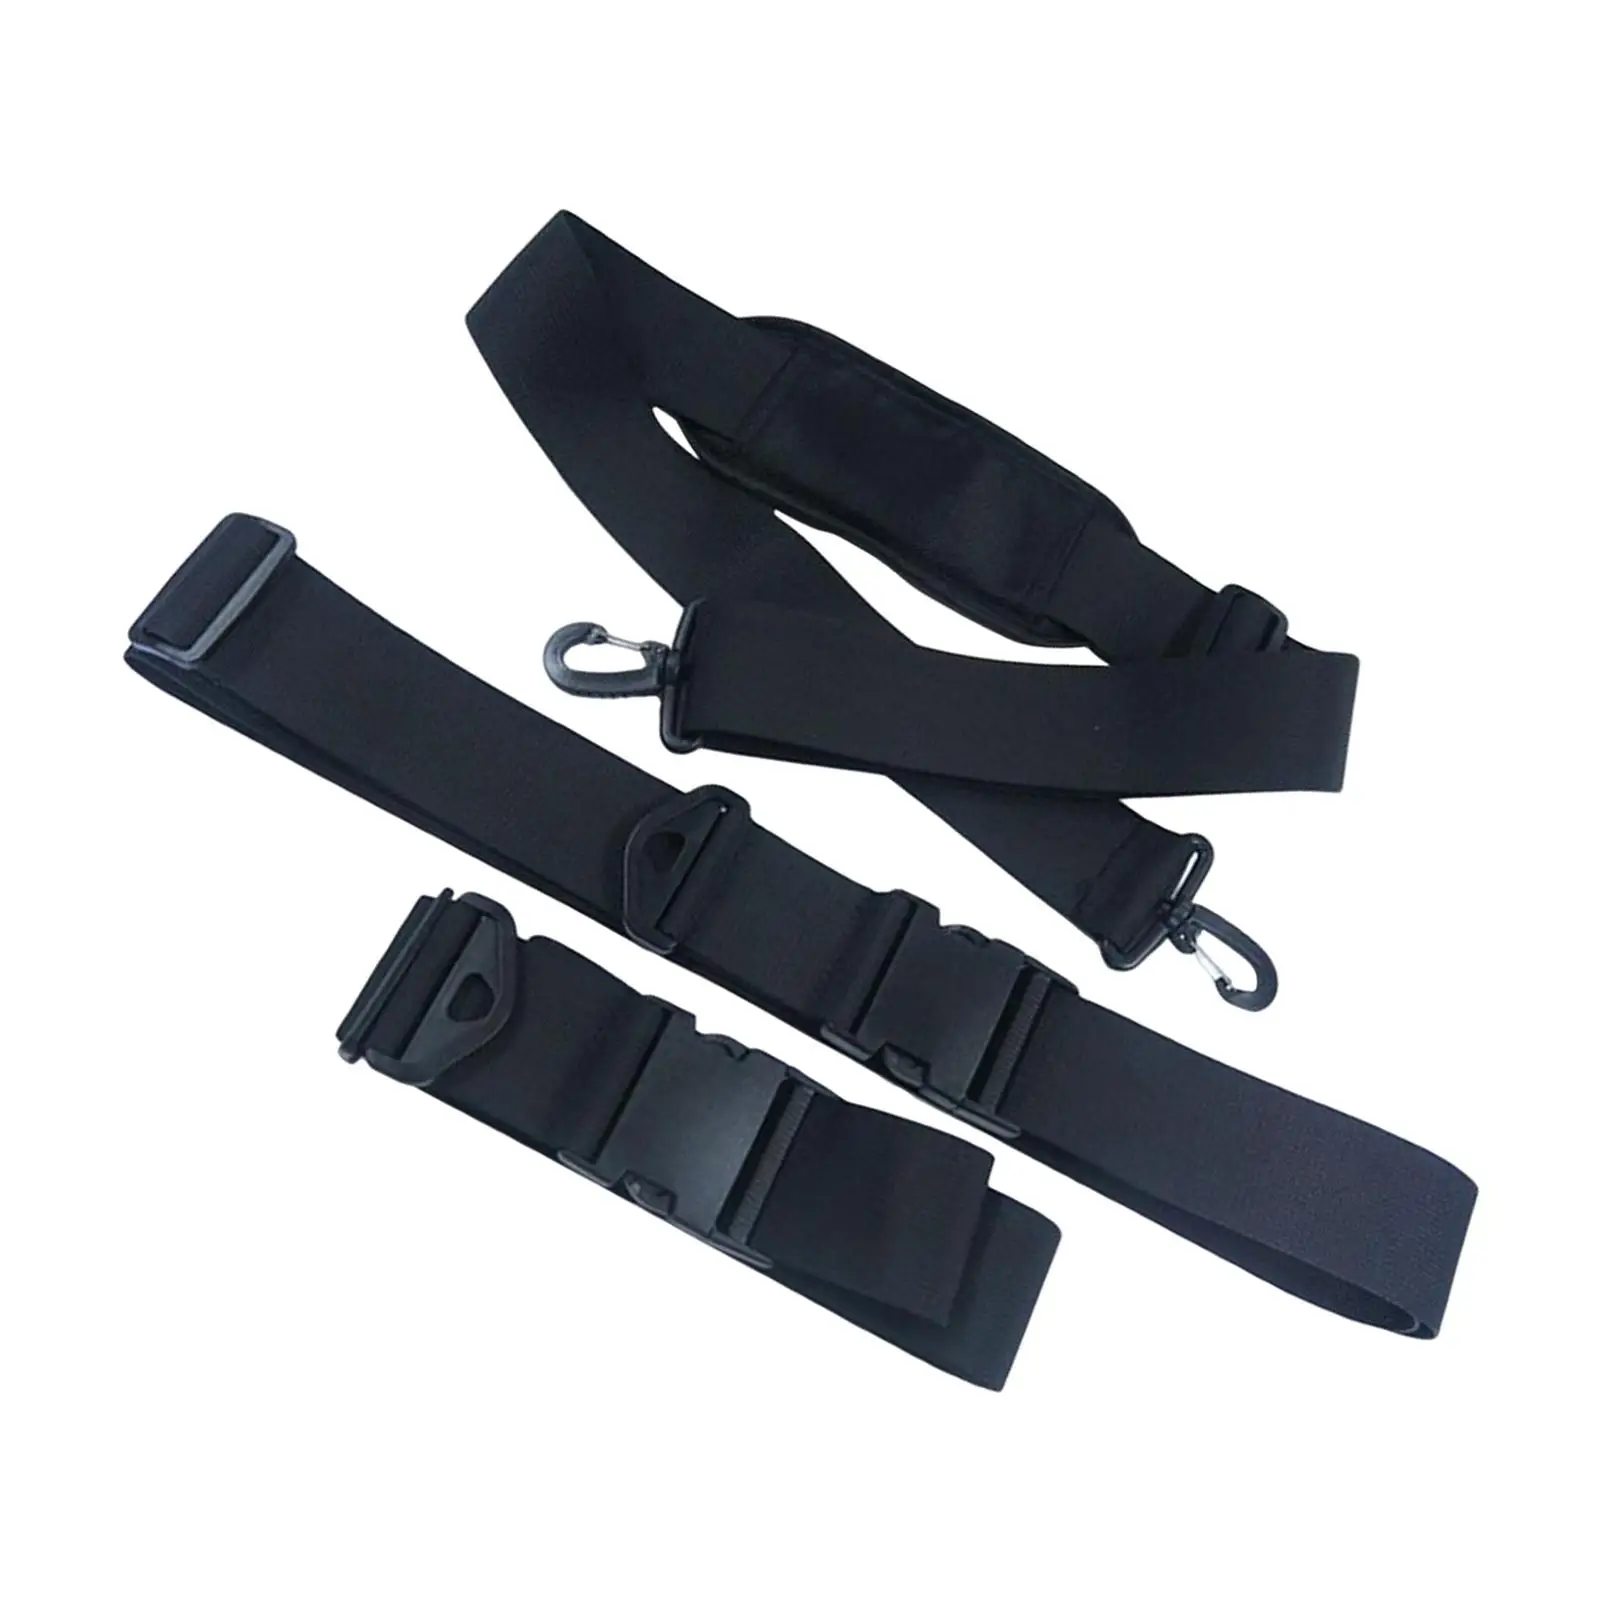 Carrying Sling Carrier Paddle Board Accessories Carry Belt Paddle Board Shoulder Strap for Canoe Surfing Women Men Paddleboard